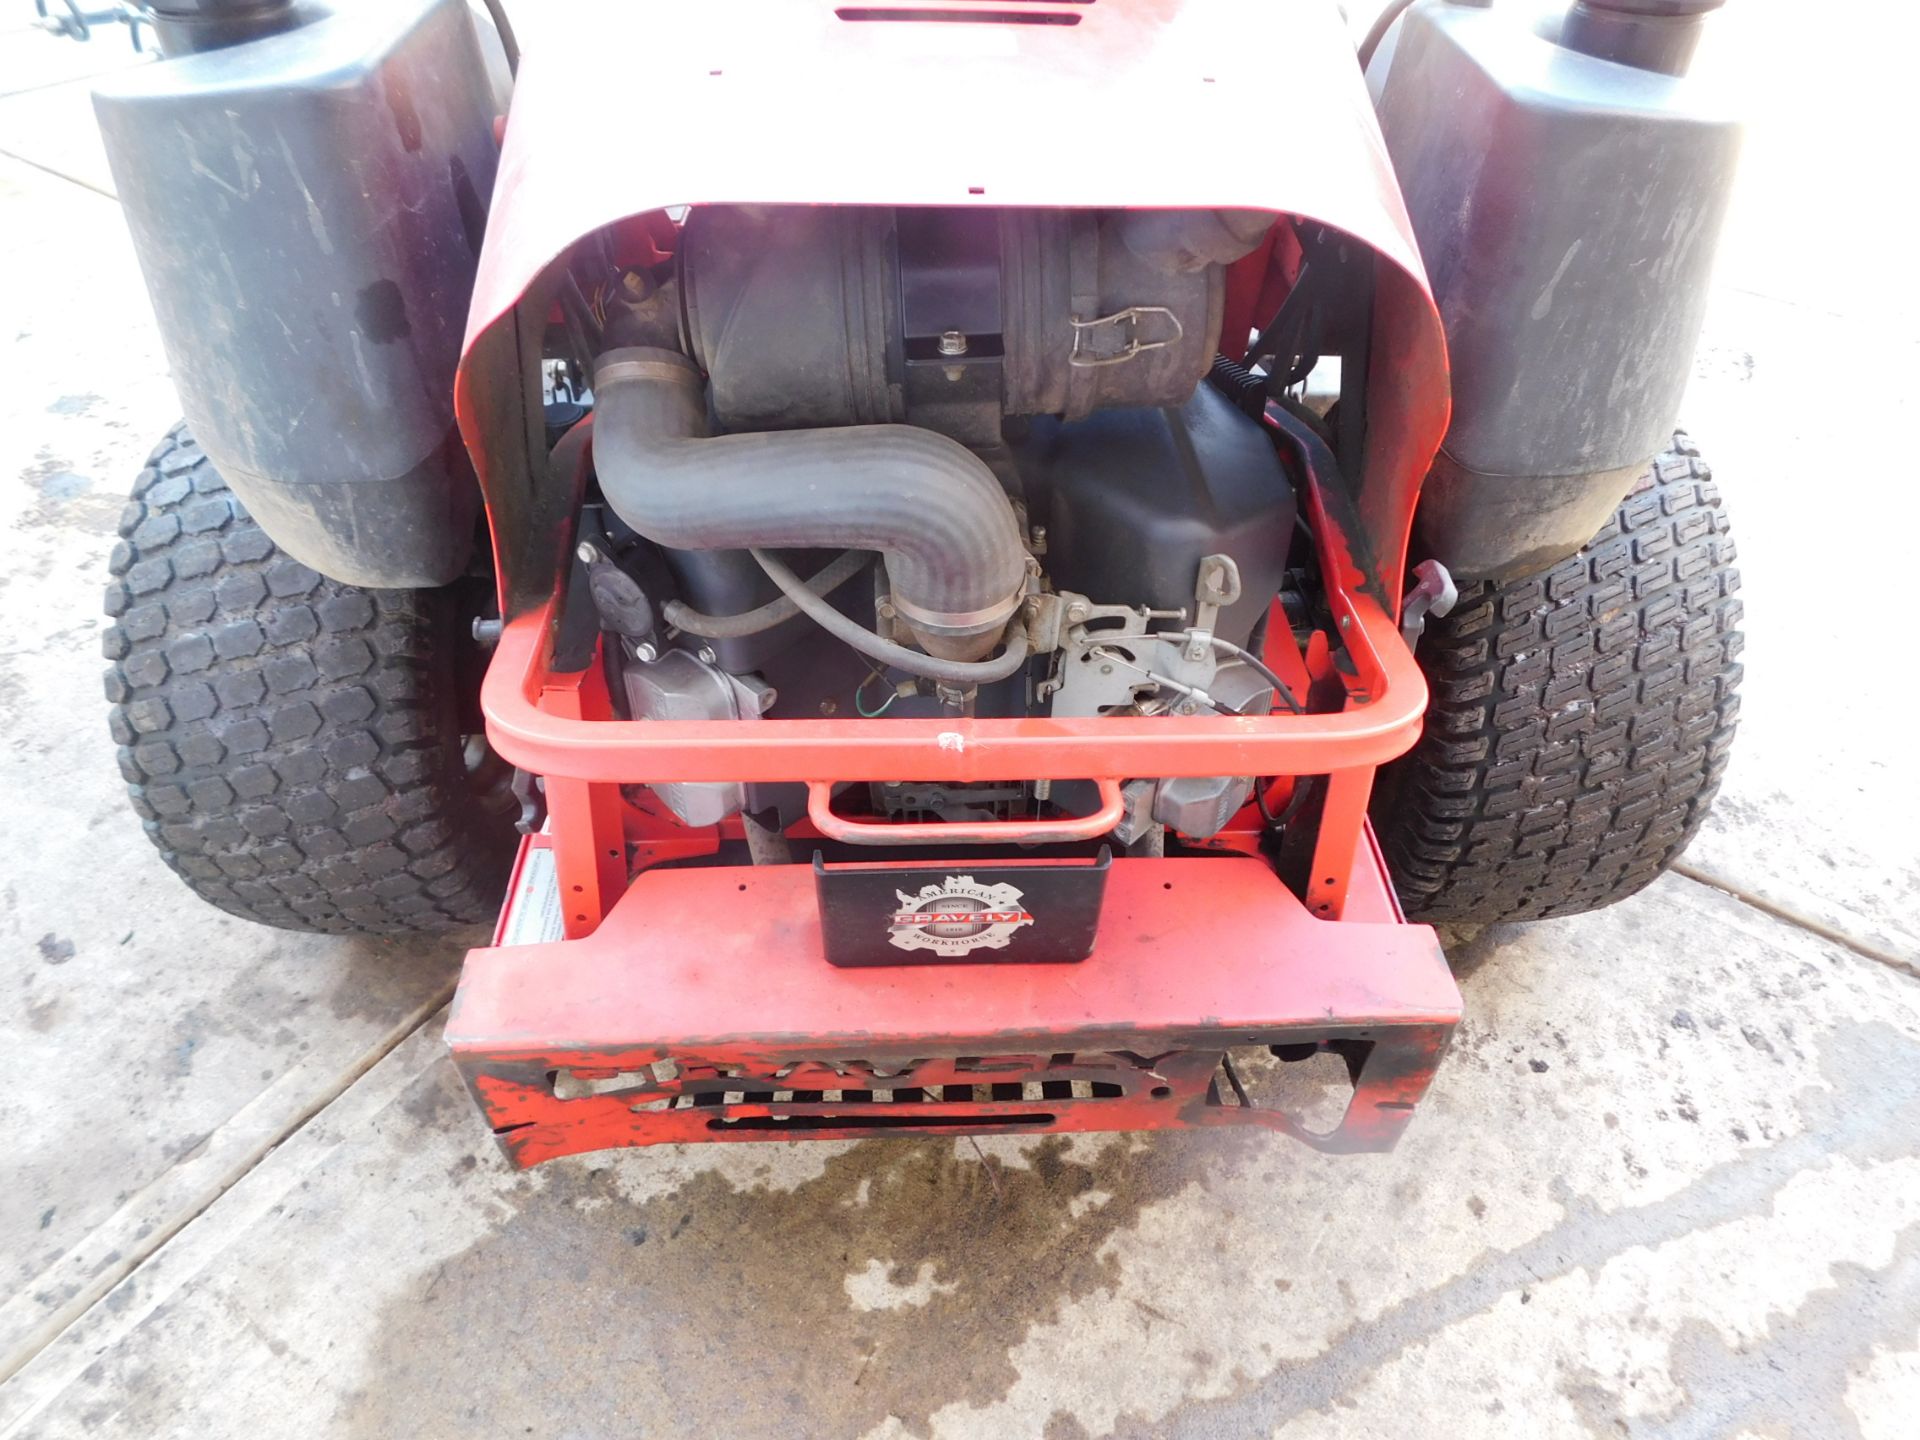 Gravely ProMaster 260 Commercial Zero Turn Mower SN#010684, 60"deck, Kawaski Gas Engine 3,152hrs. - Image 5 of 13